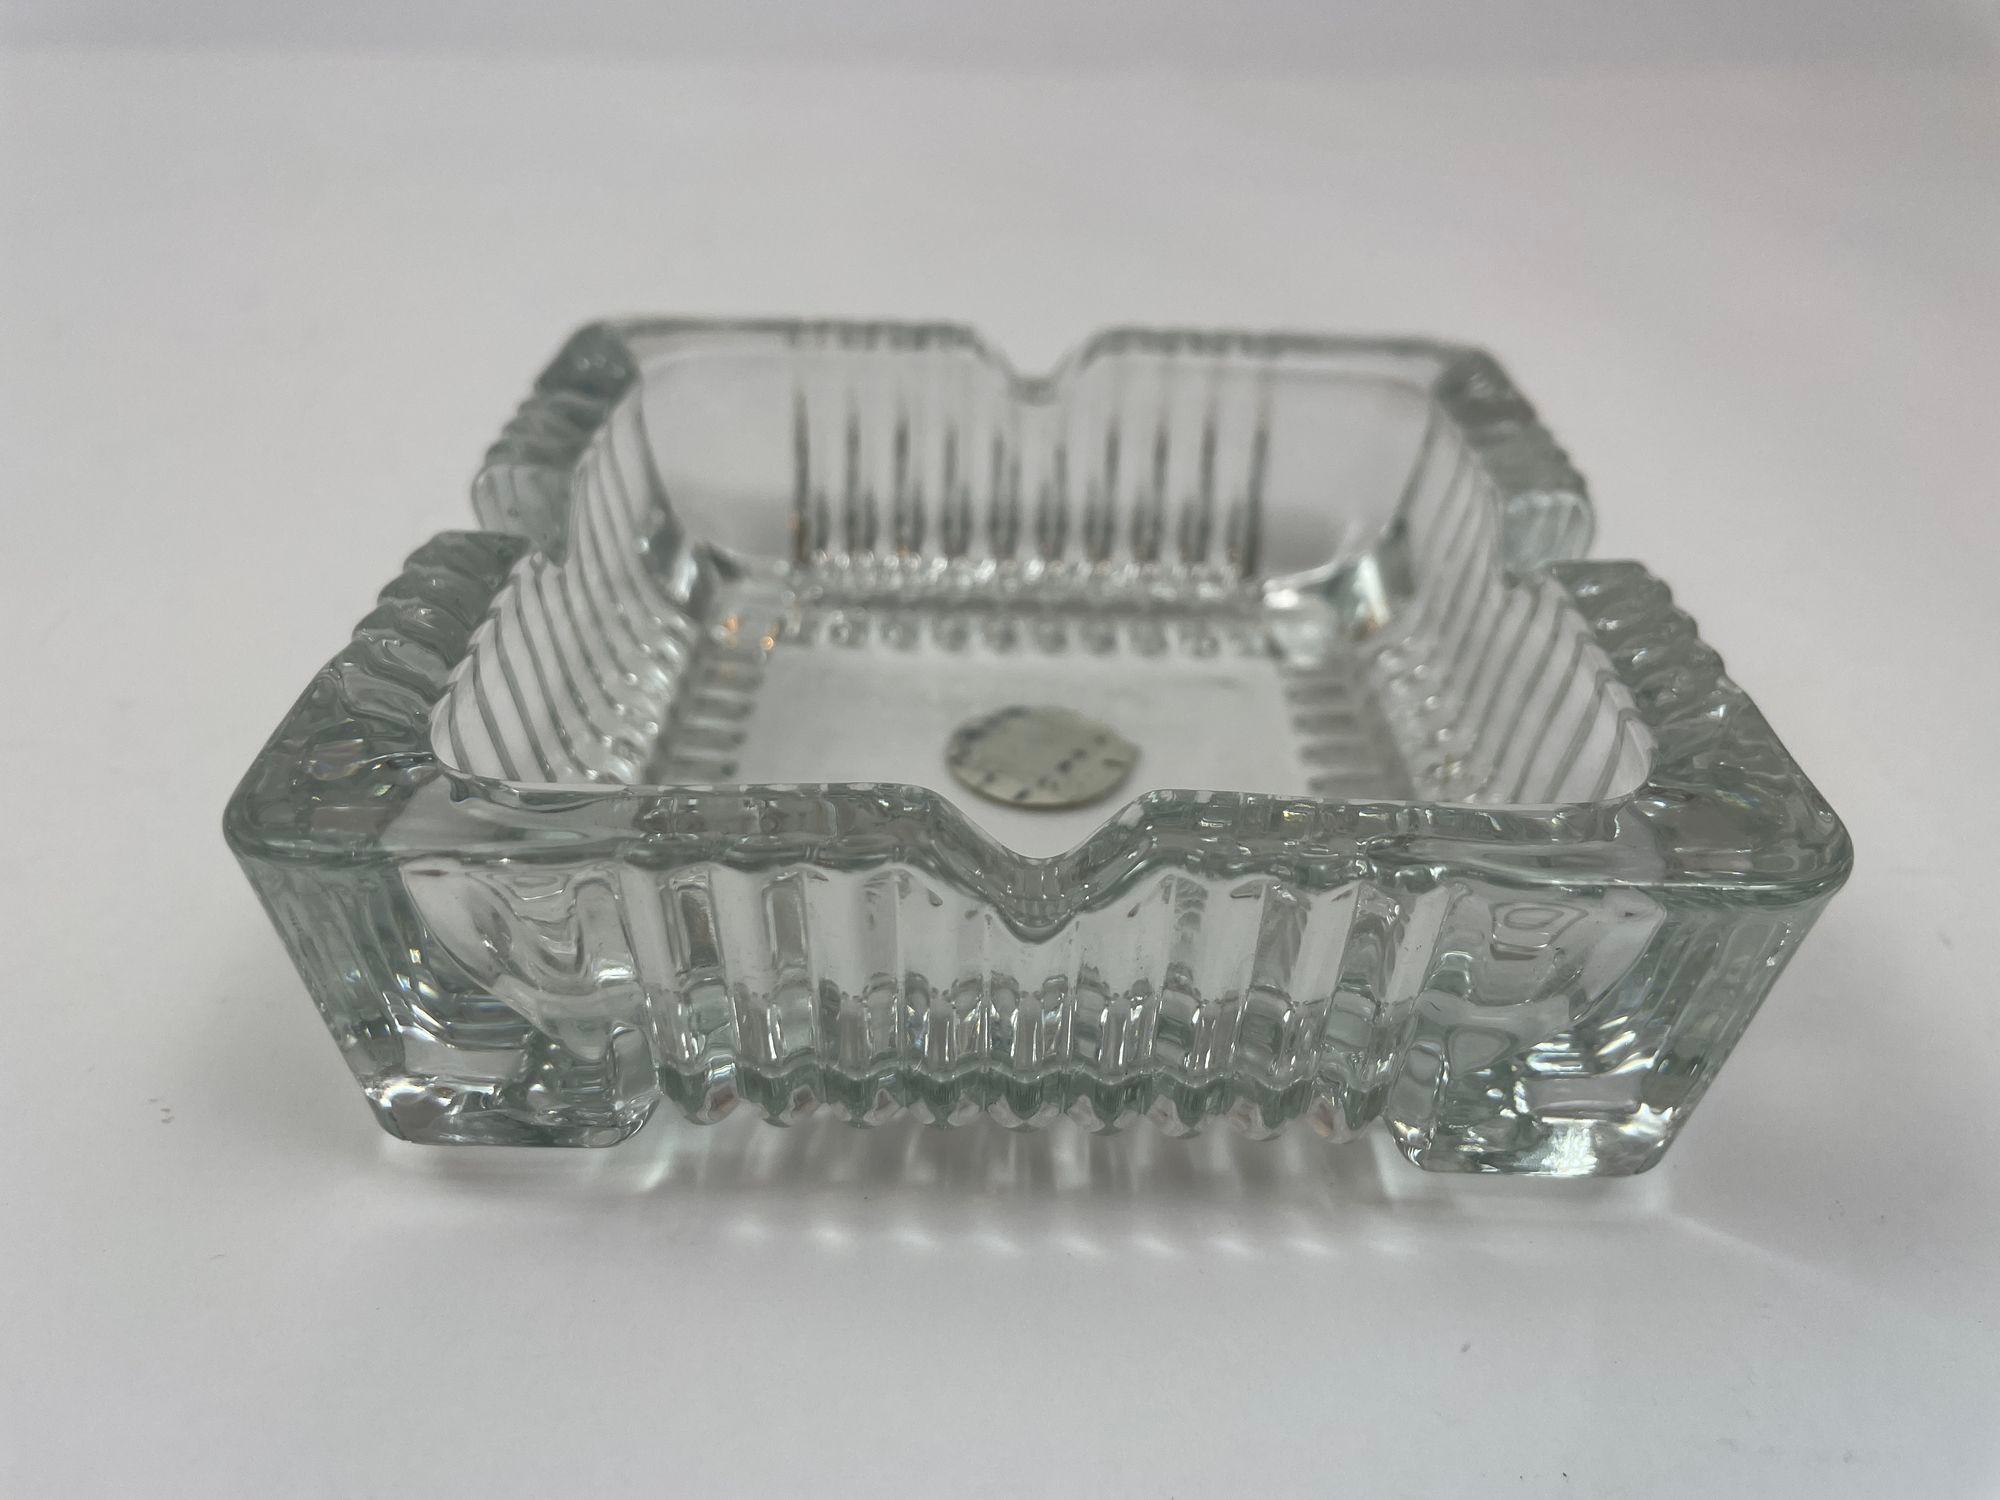 Vintage Clear Cristal D'Arques Crystal Ashtray Trinket Dish France Cut Glass Square Catchall.
Large thick cut glass square glass ashtray with beautiful detailed glasswork offering 4 spaces to hold your smoking item.
Cristal D'Arques, Made in France